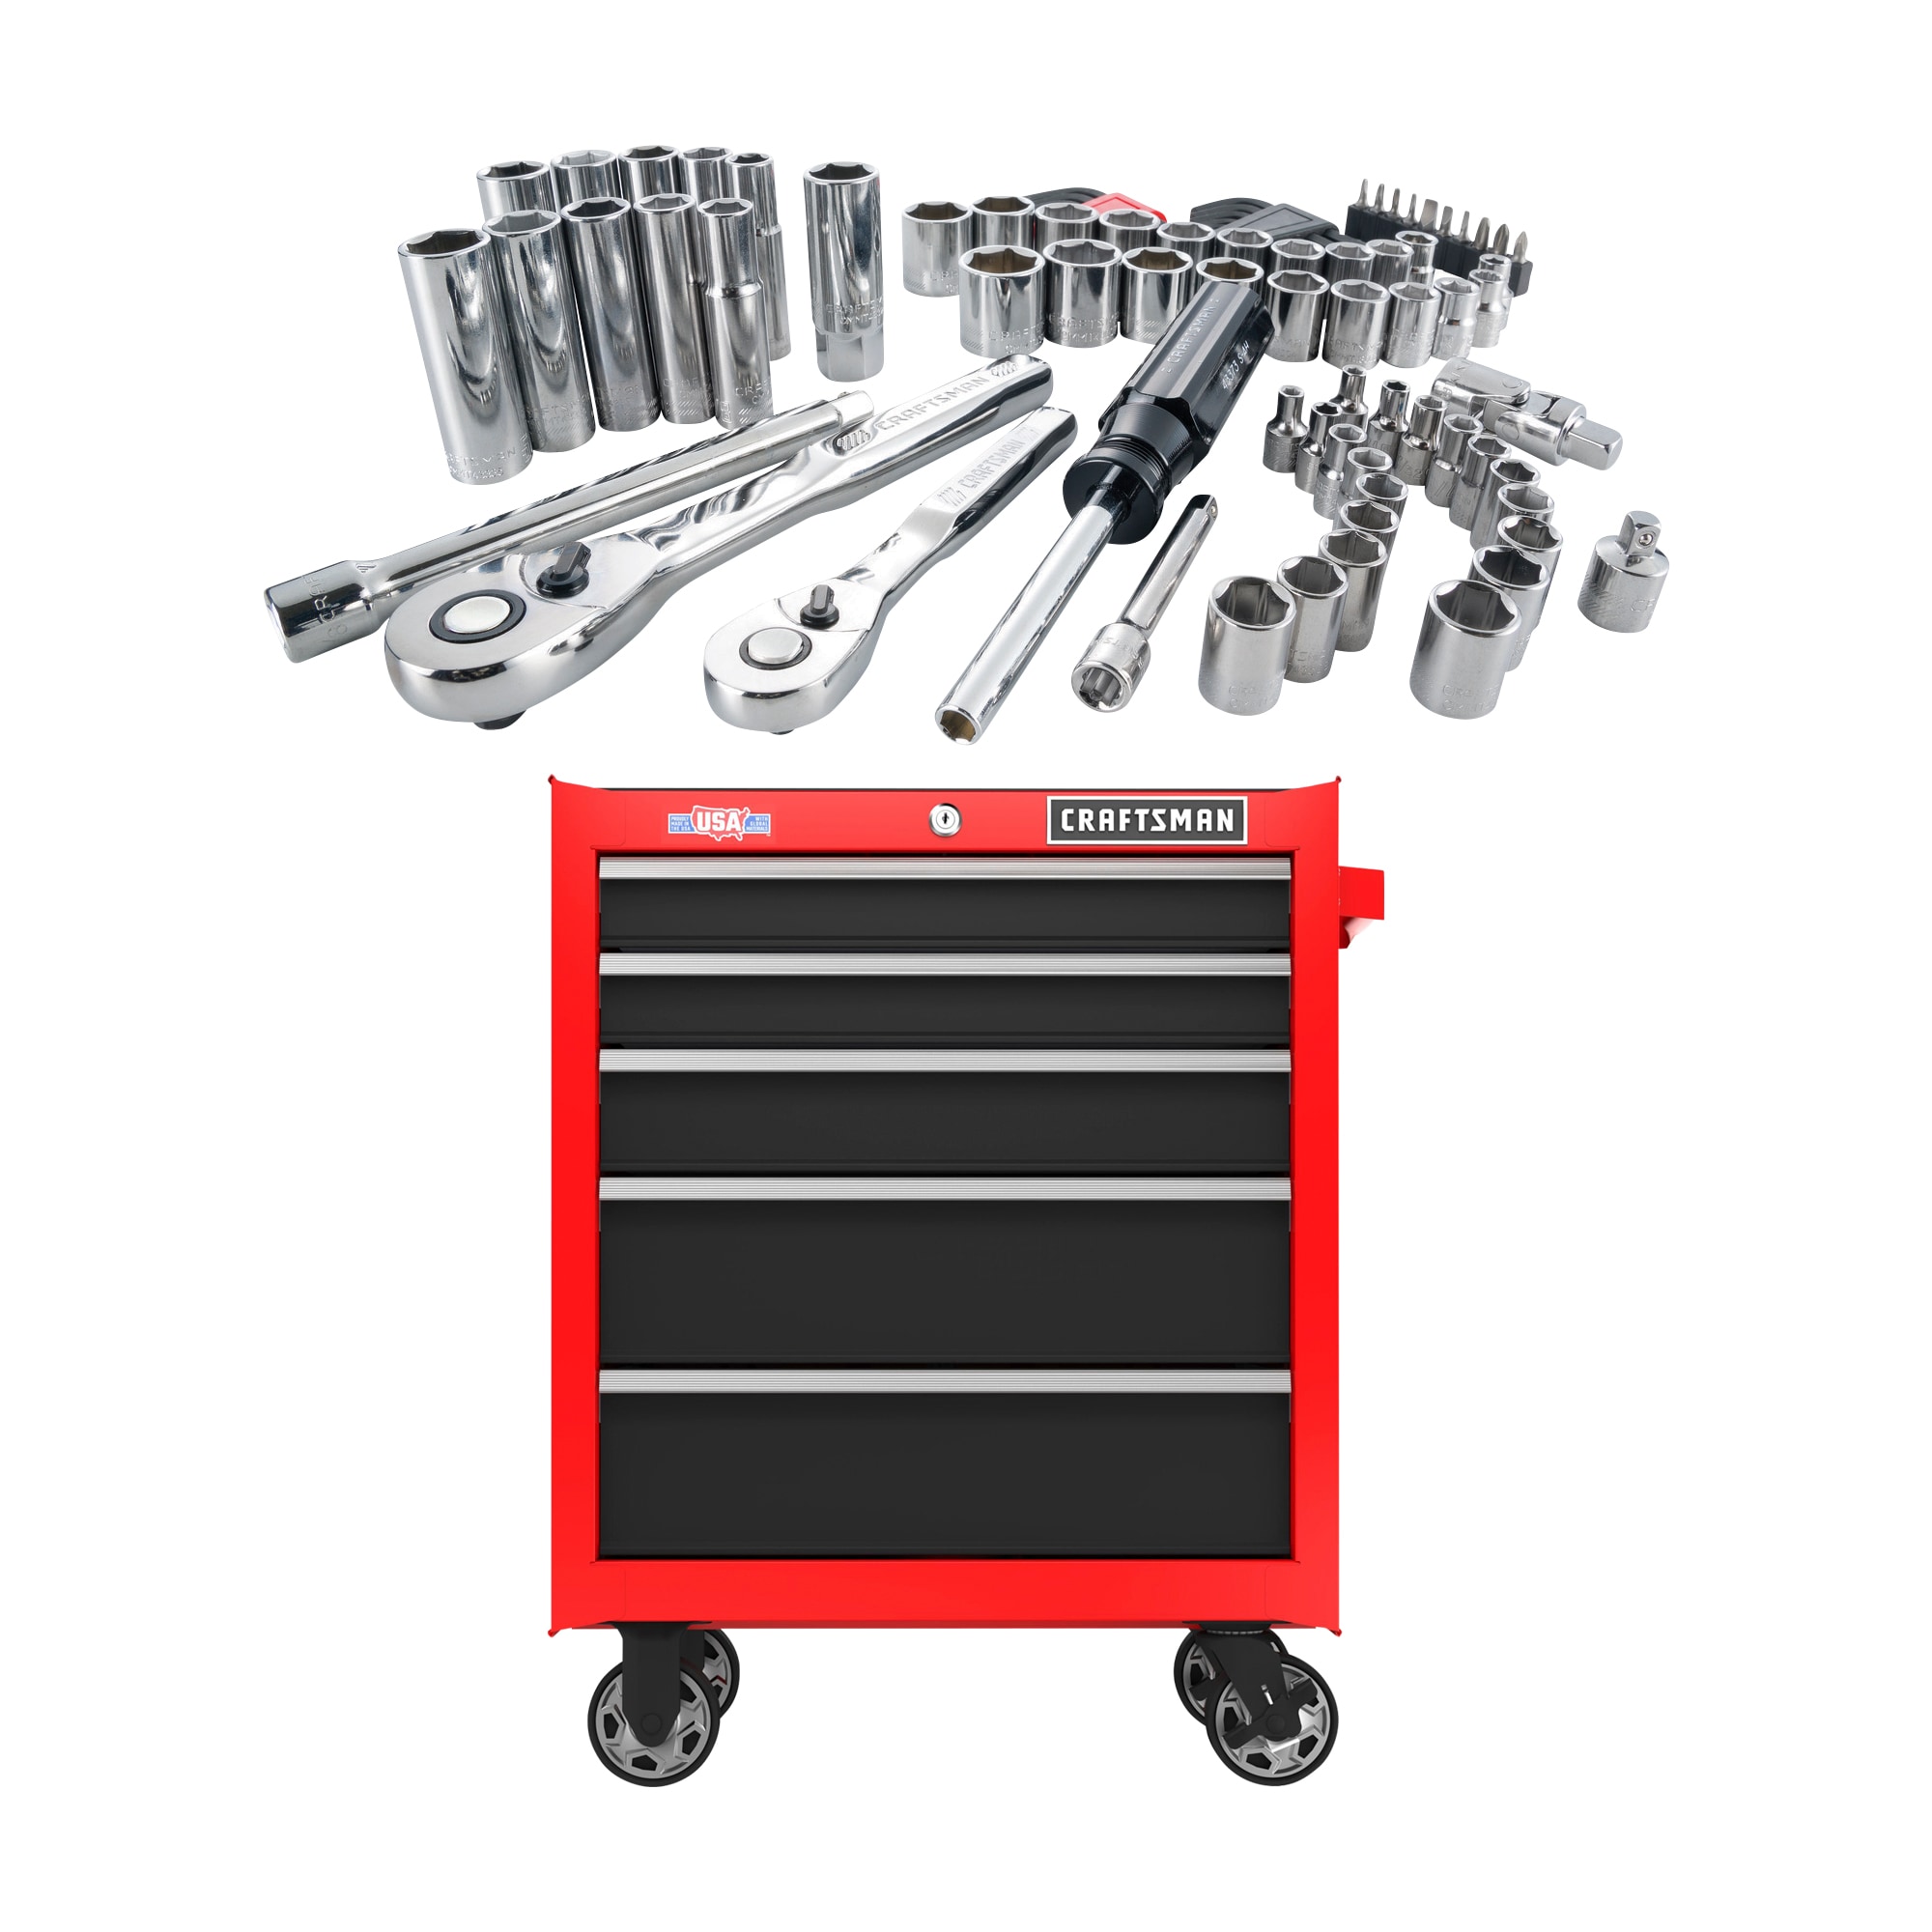 CRAFTSMAN 2000 Series 26.5-in W x 34-in H 5-Drawer Steel Rolling Tool Cabinet (Red) & 83-Piece Standard (SAE) and Metric Combination Polished Chrome